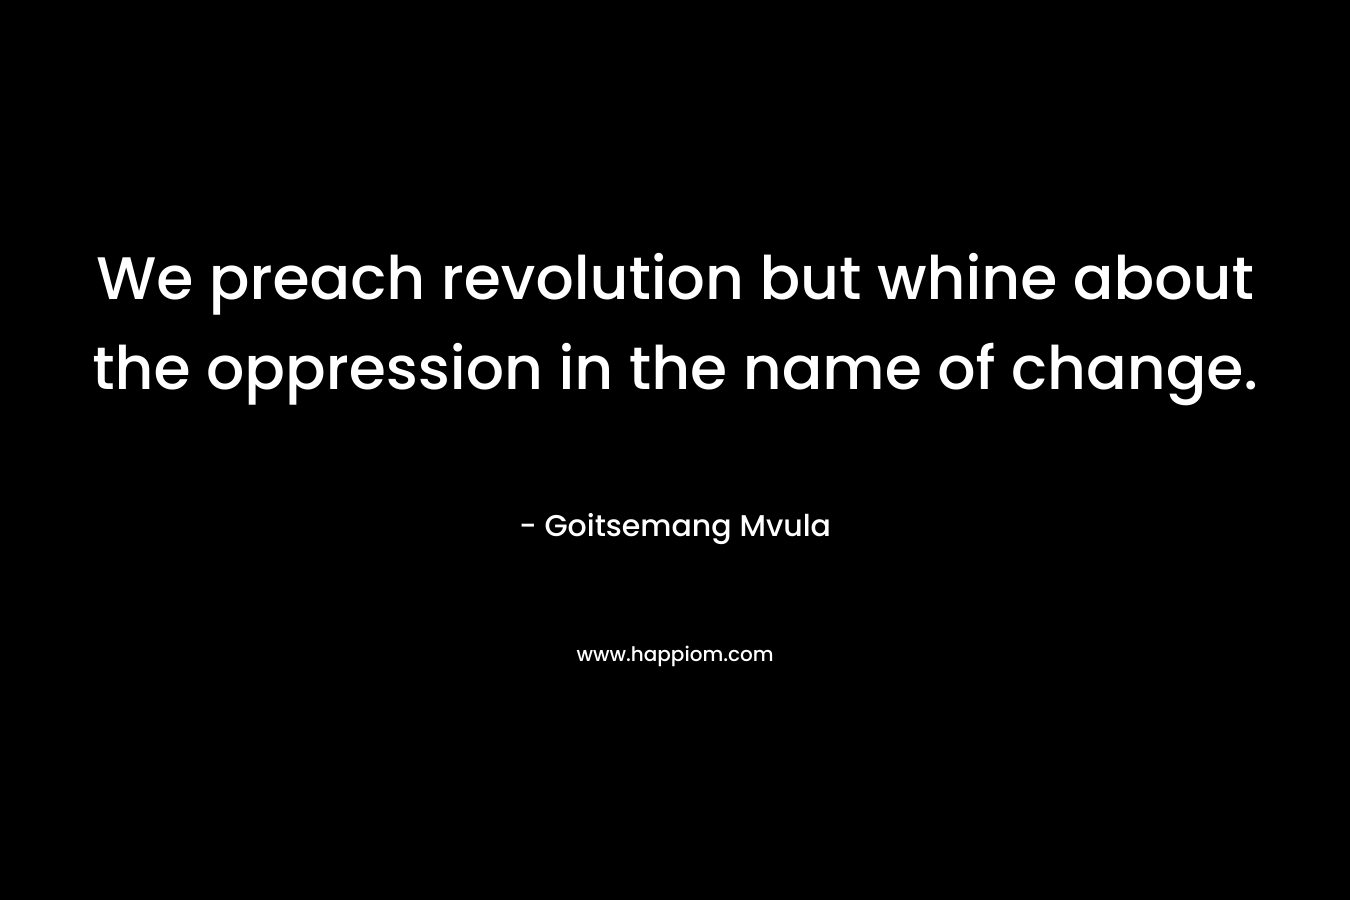 We preach revolution but whine about the oppression in the name of change. – Goitsemang Mvula